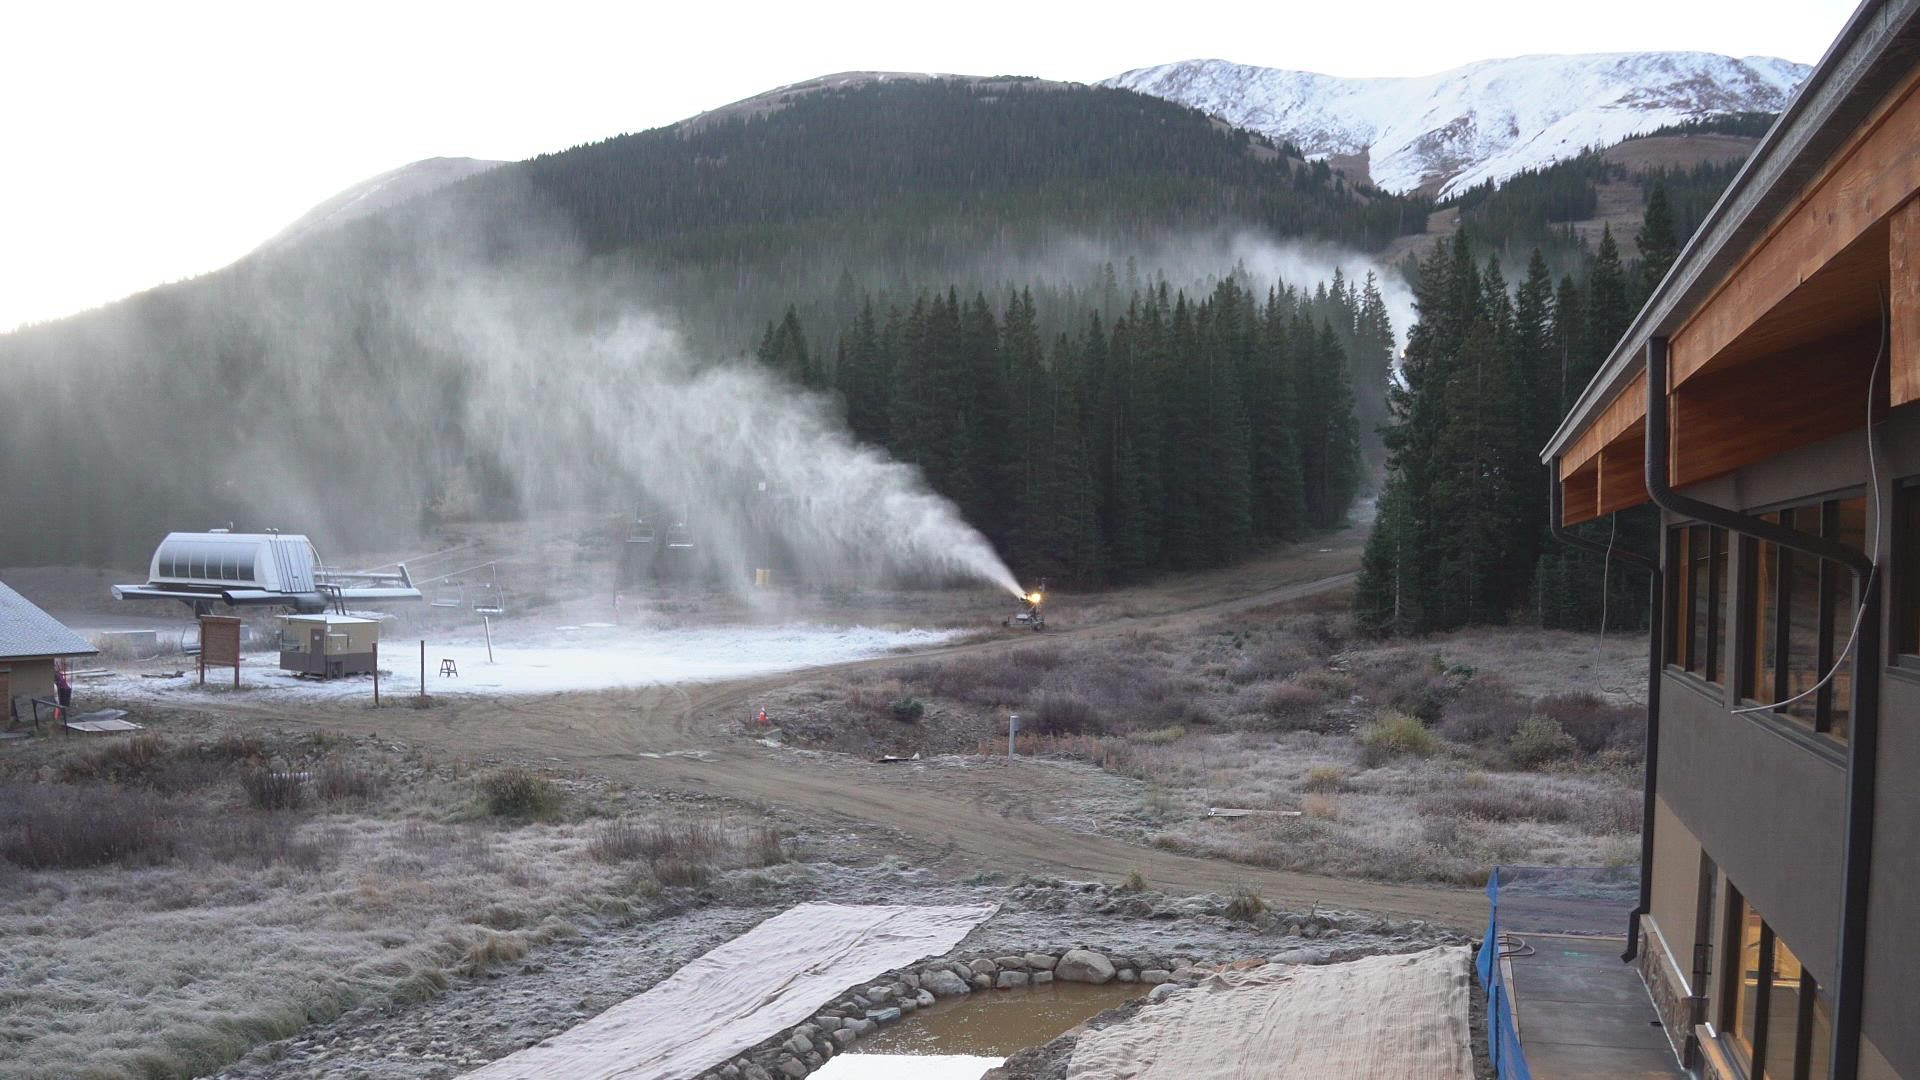 It typically takes about two weeks for snowmakers to cover the opening day run from tree-to-tree with an 18-inch base.